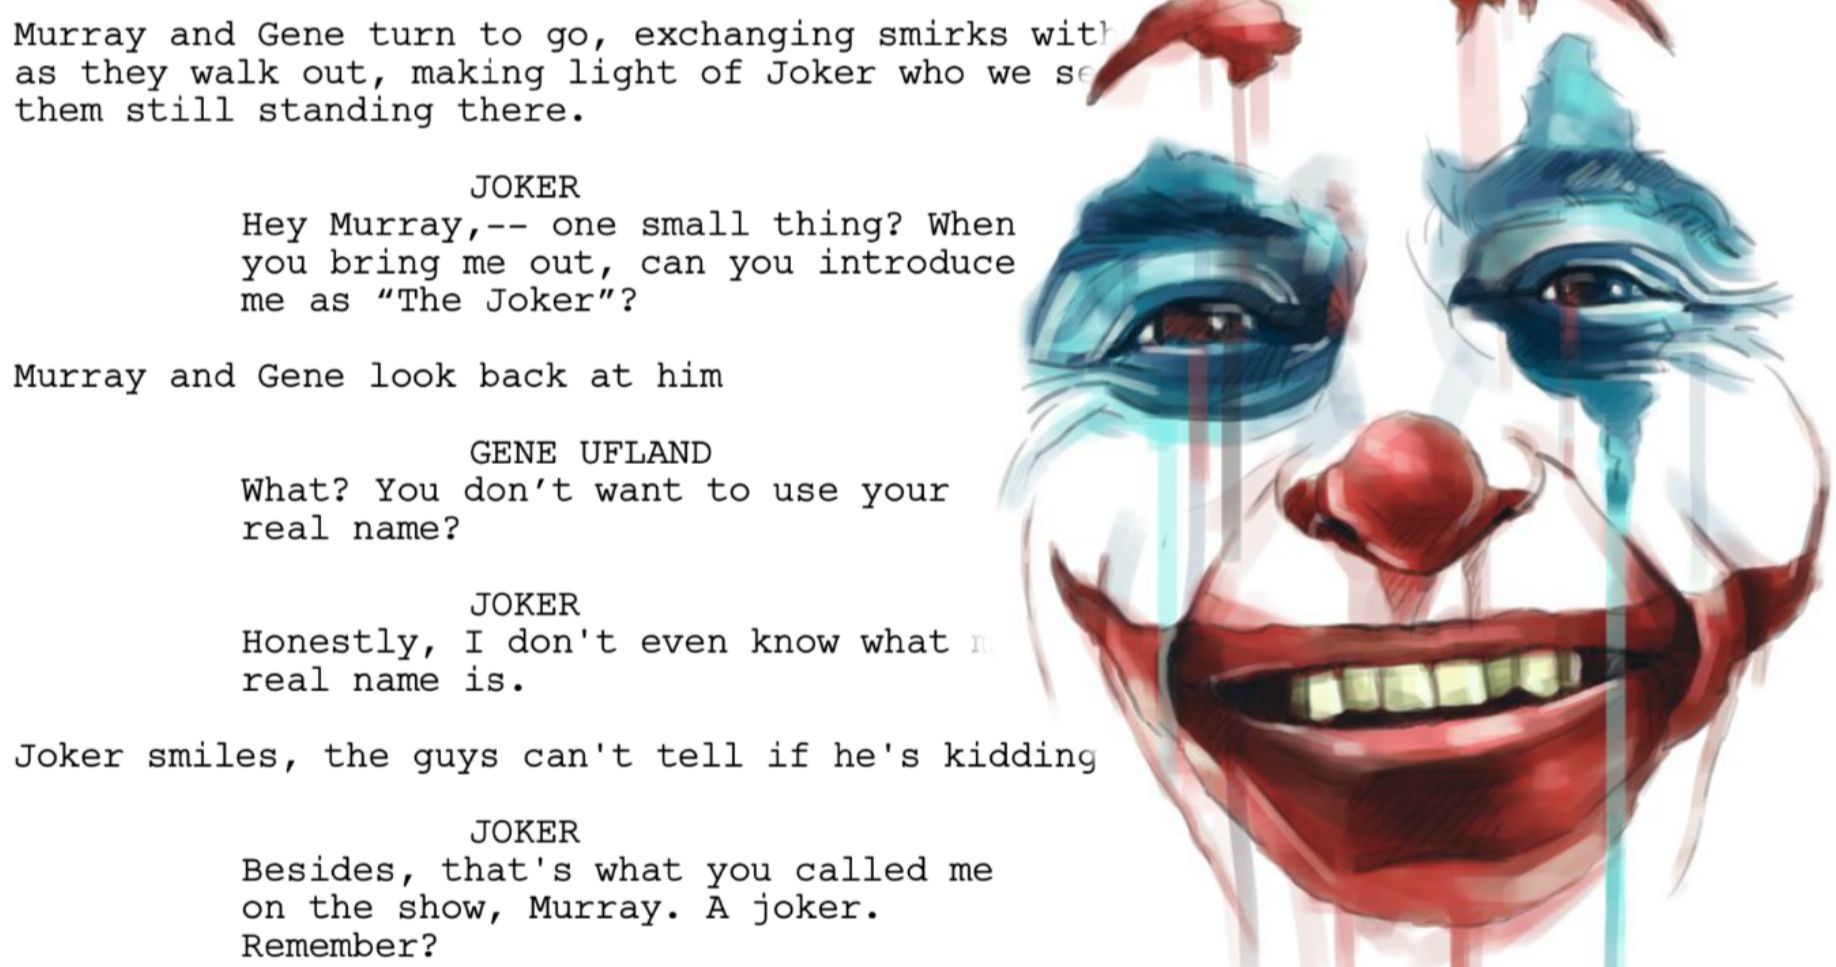 Joker Script Is Now Available to Read Online